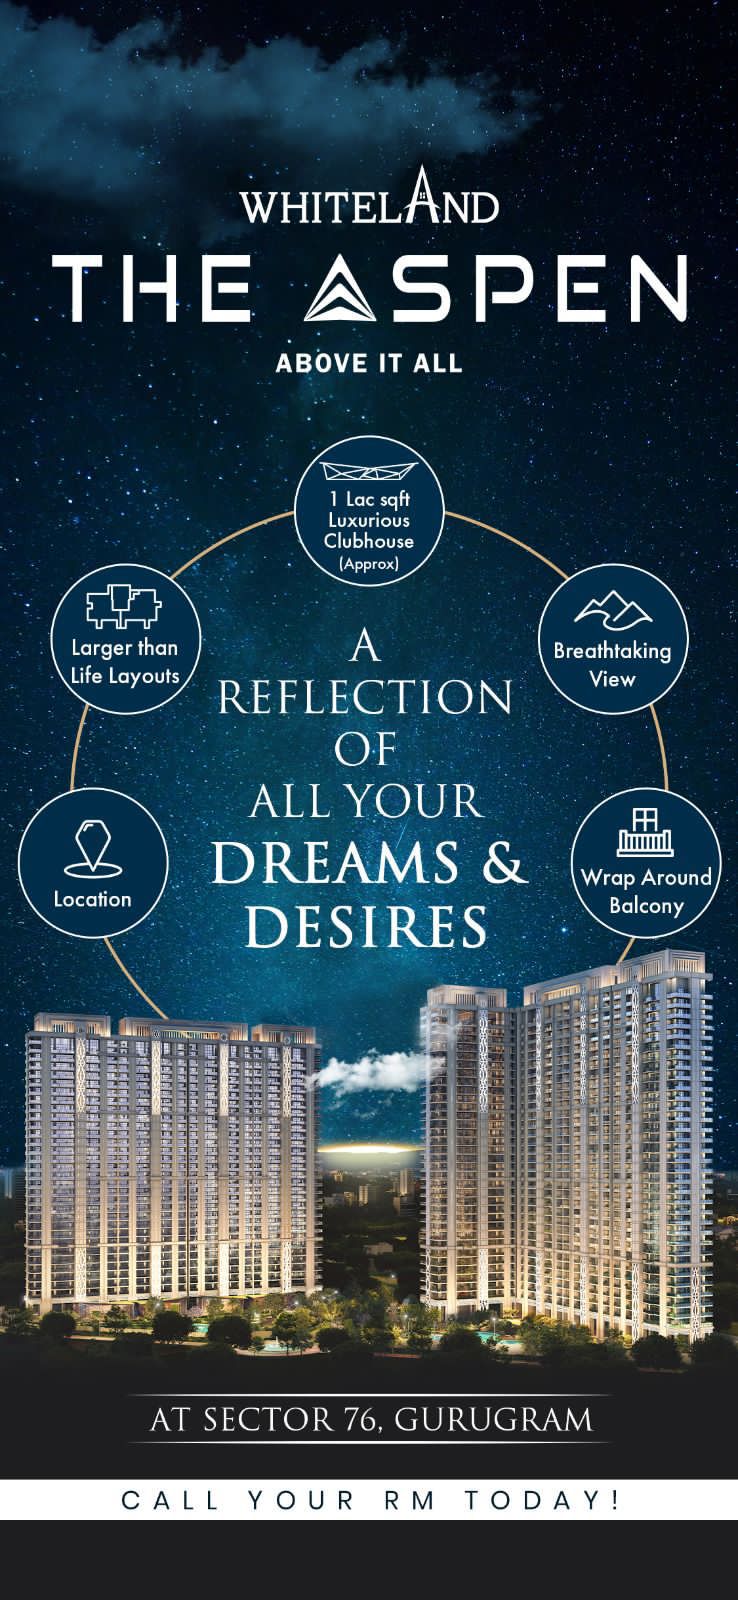 A reflection of all your dreams and desires at Whiteland The Aspen in Sector 76, Gurgaon